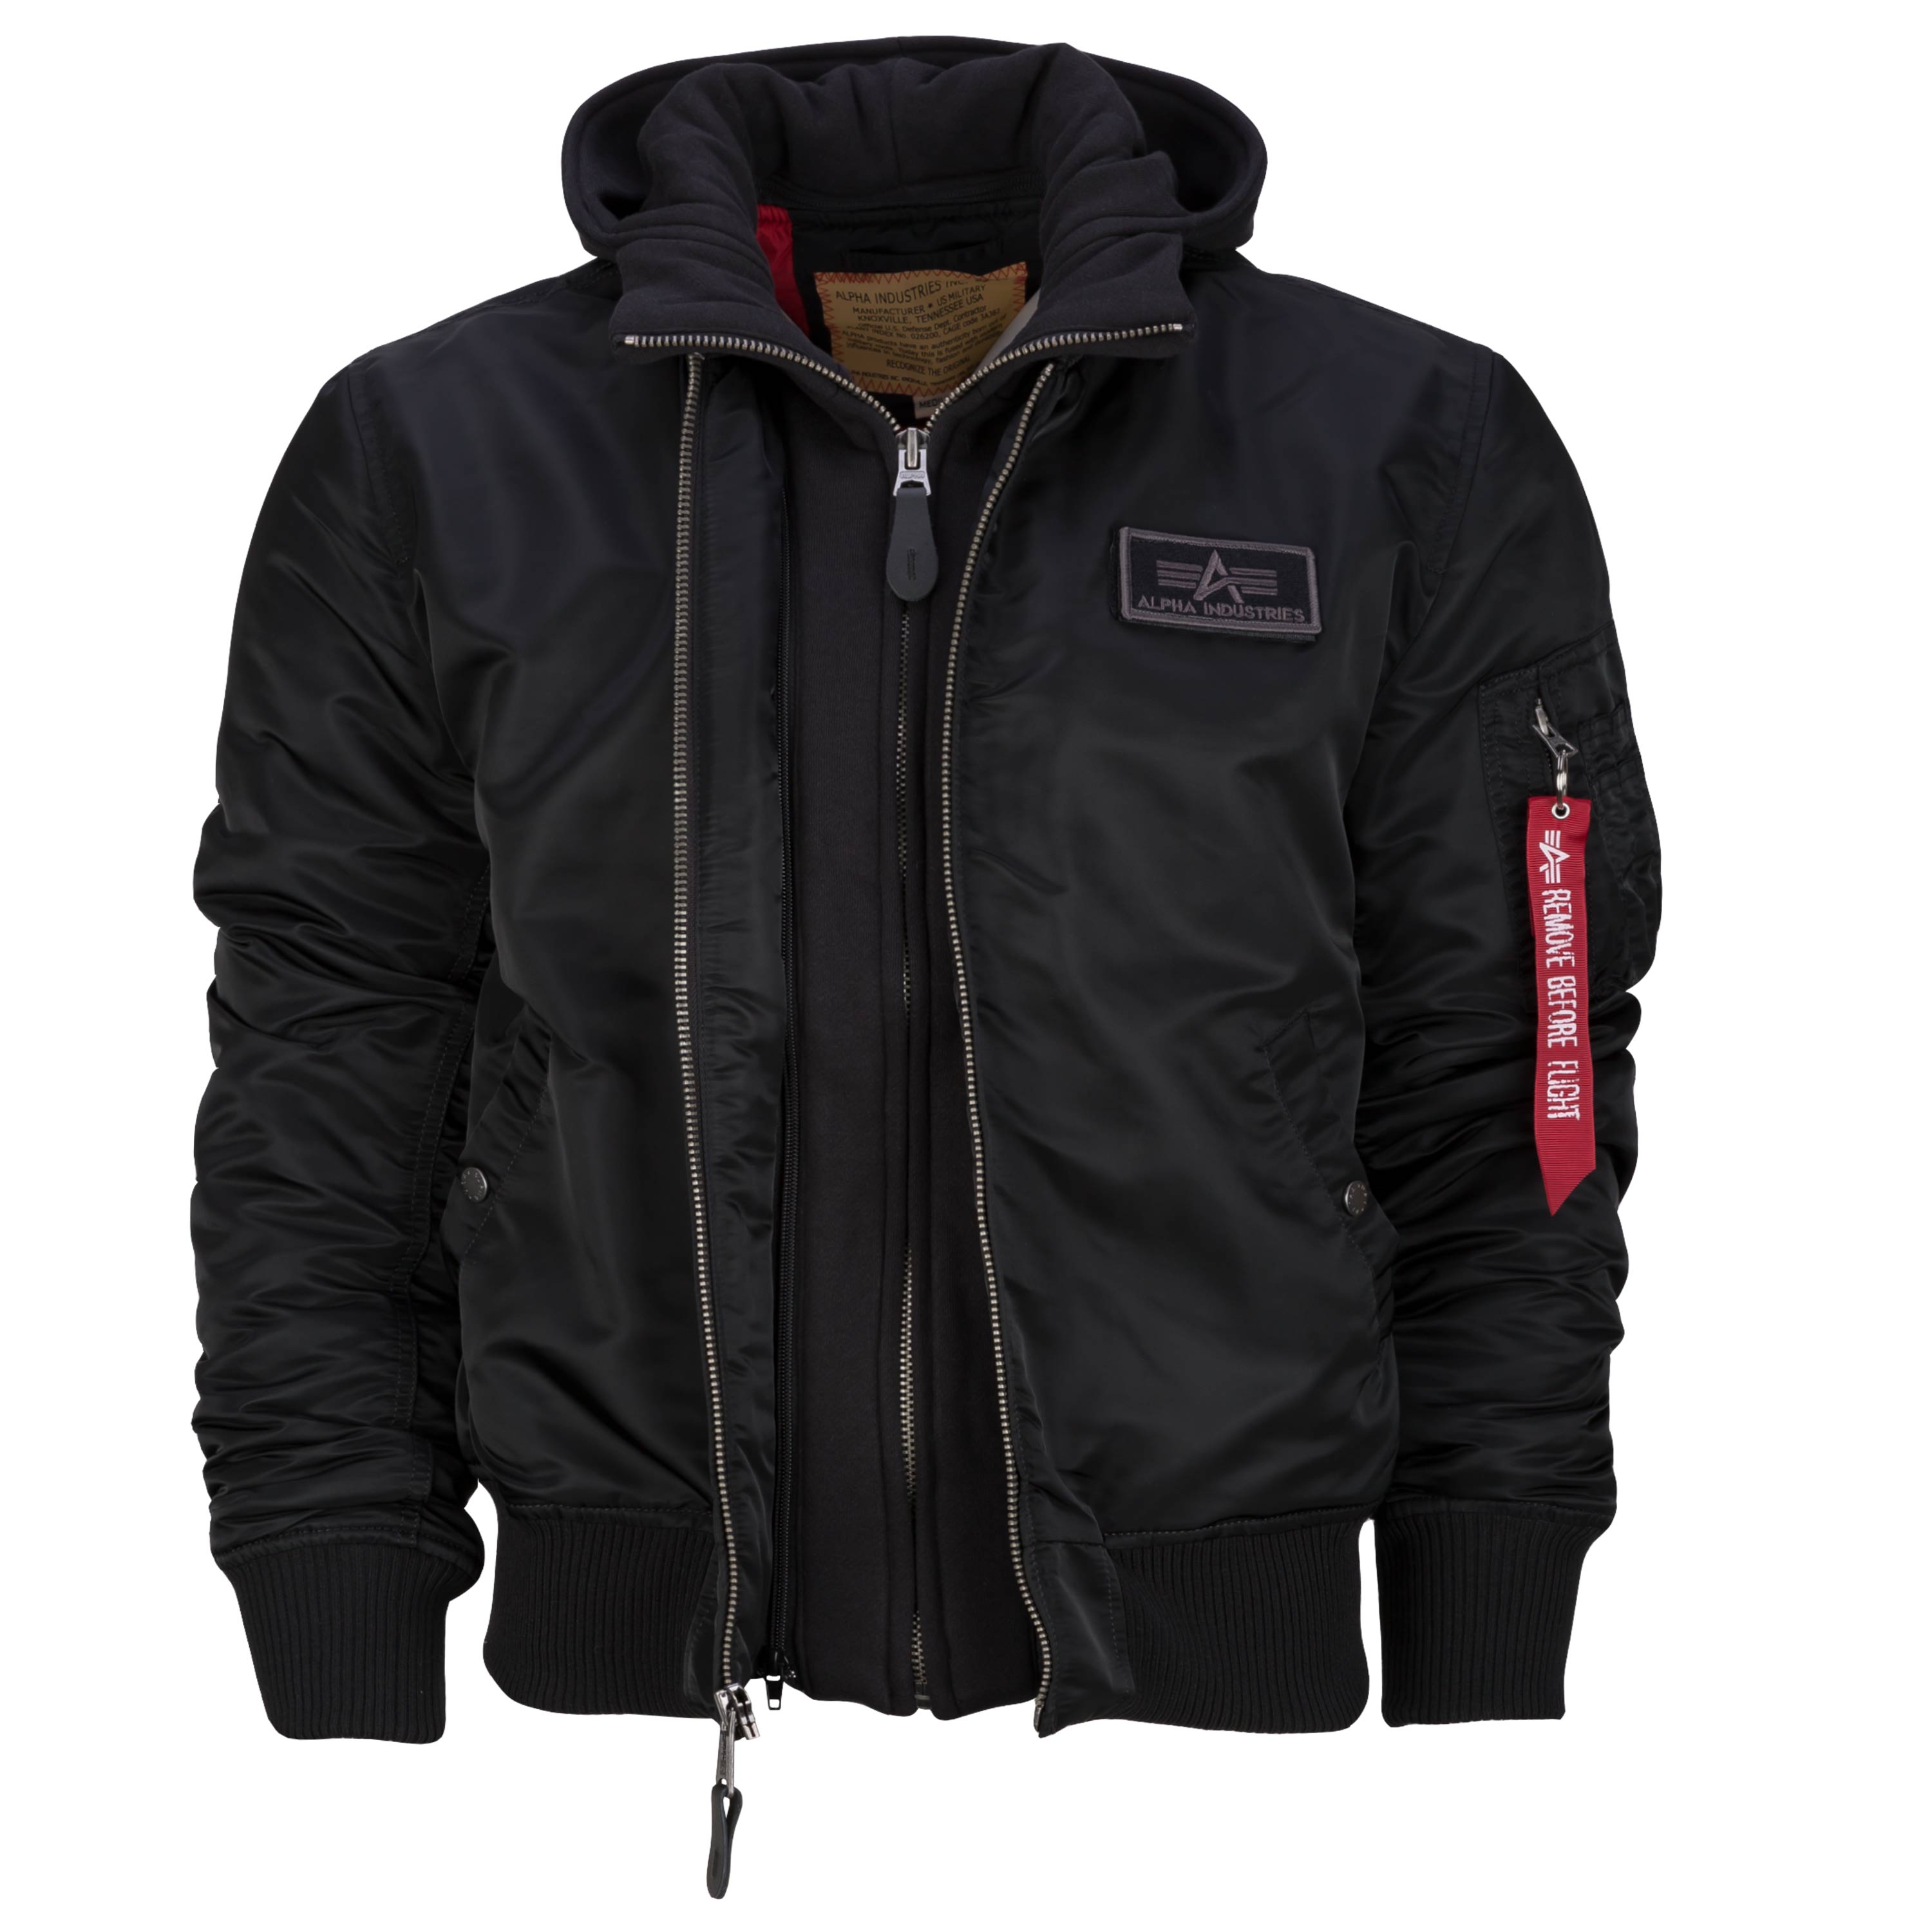 Purchase the D-Tec MA-1 II by Alpha black Industries Jacket ASMC